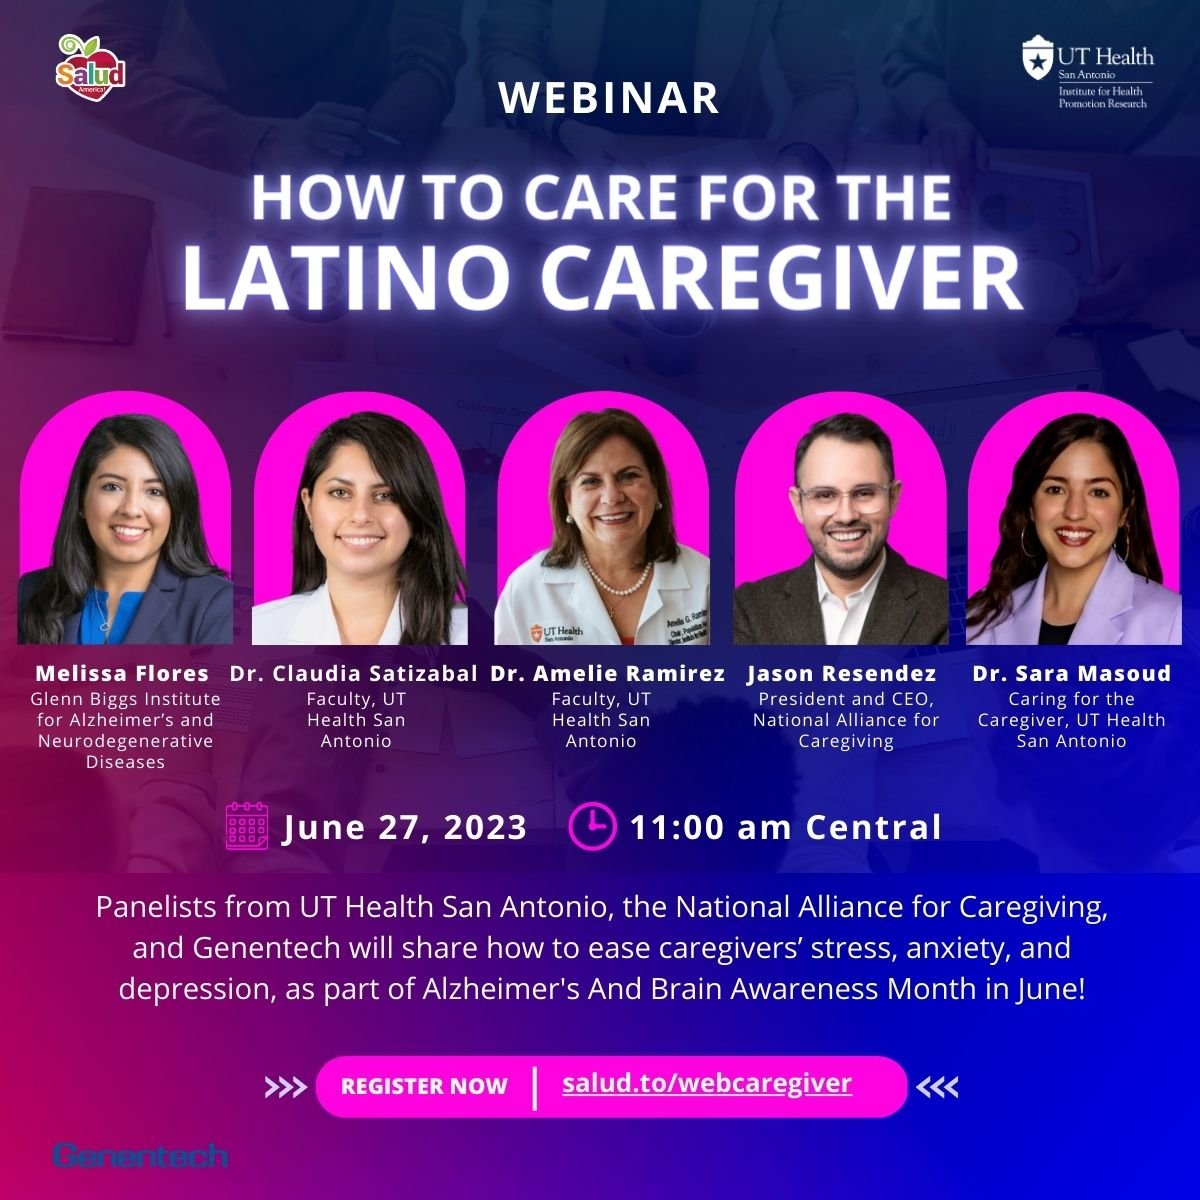 Thrilled to join @UTHealthSA, @SaludAmerica and this amazing group of of women for a conversation on building the infrastructure we need to support Latin@ caregivers. Join us: uthealthsa.zoom.us/webinar/regist… #CaregivingInTheUS #ActOnRAISE